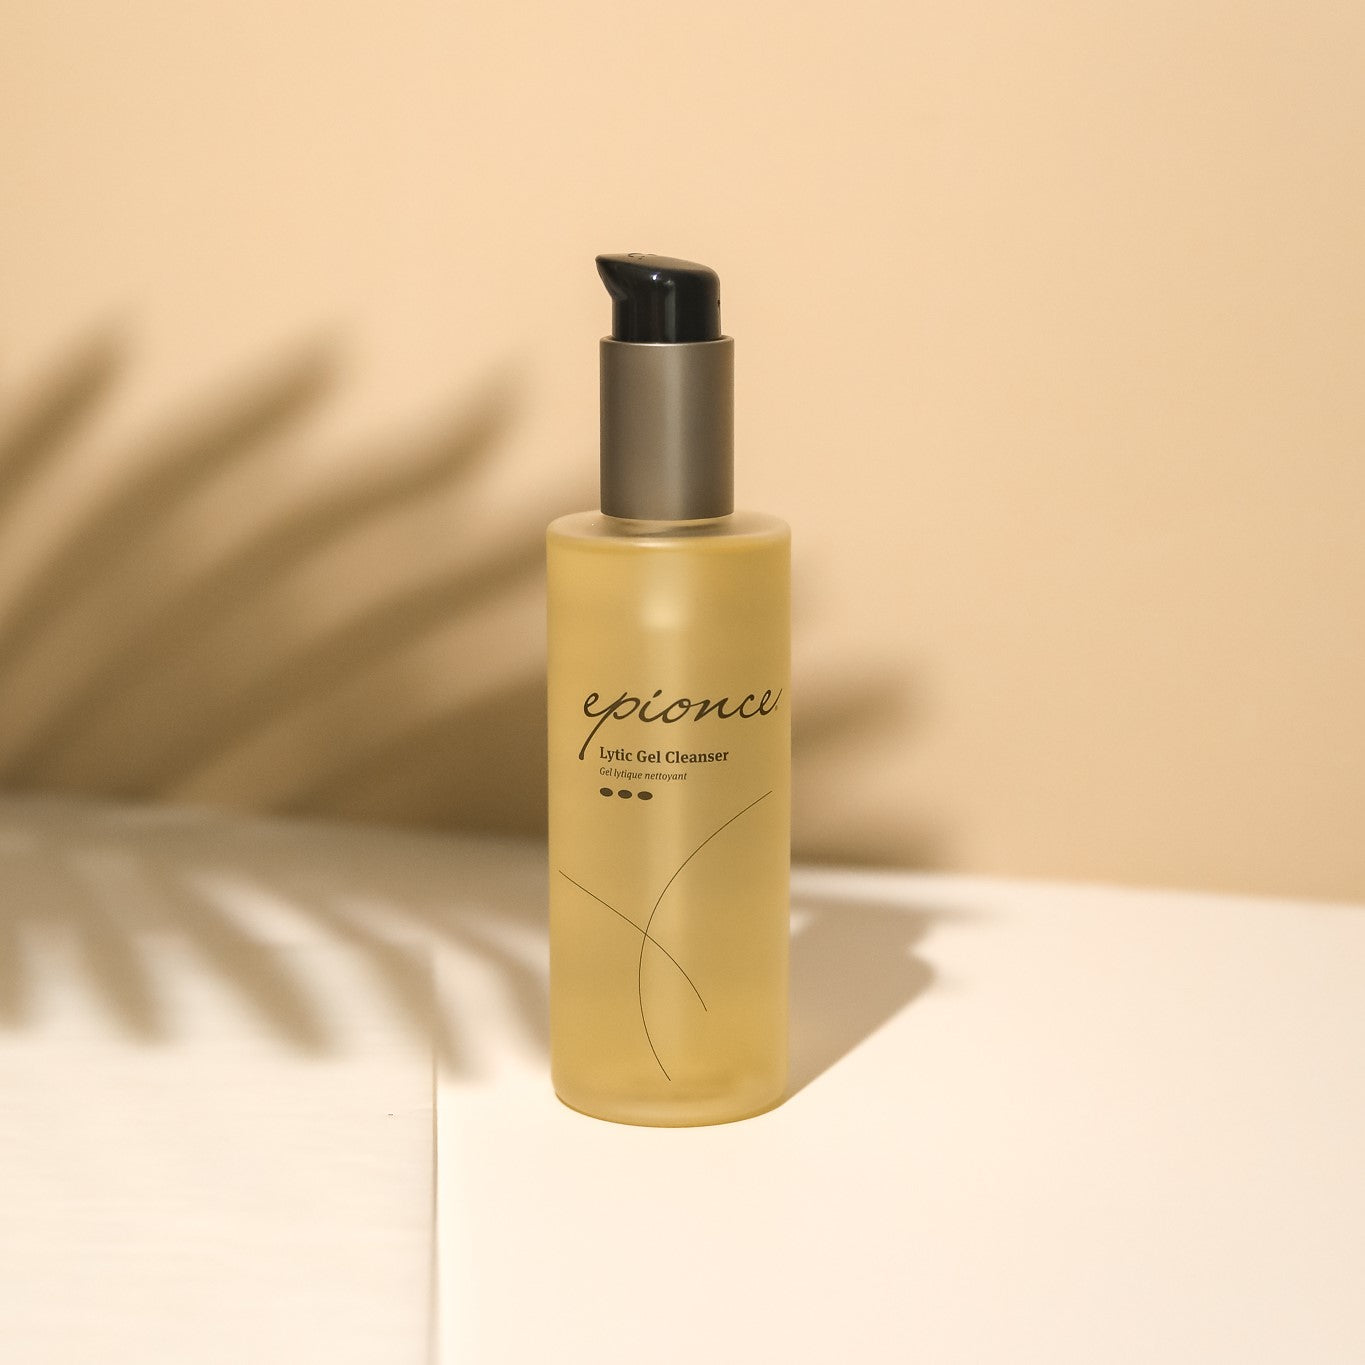 Epionce Lytic Gel Cleanser is a must-have for oily and problem skin